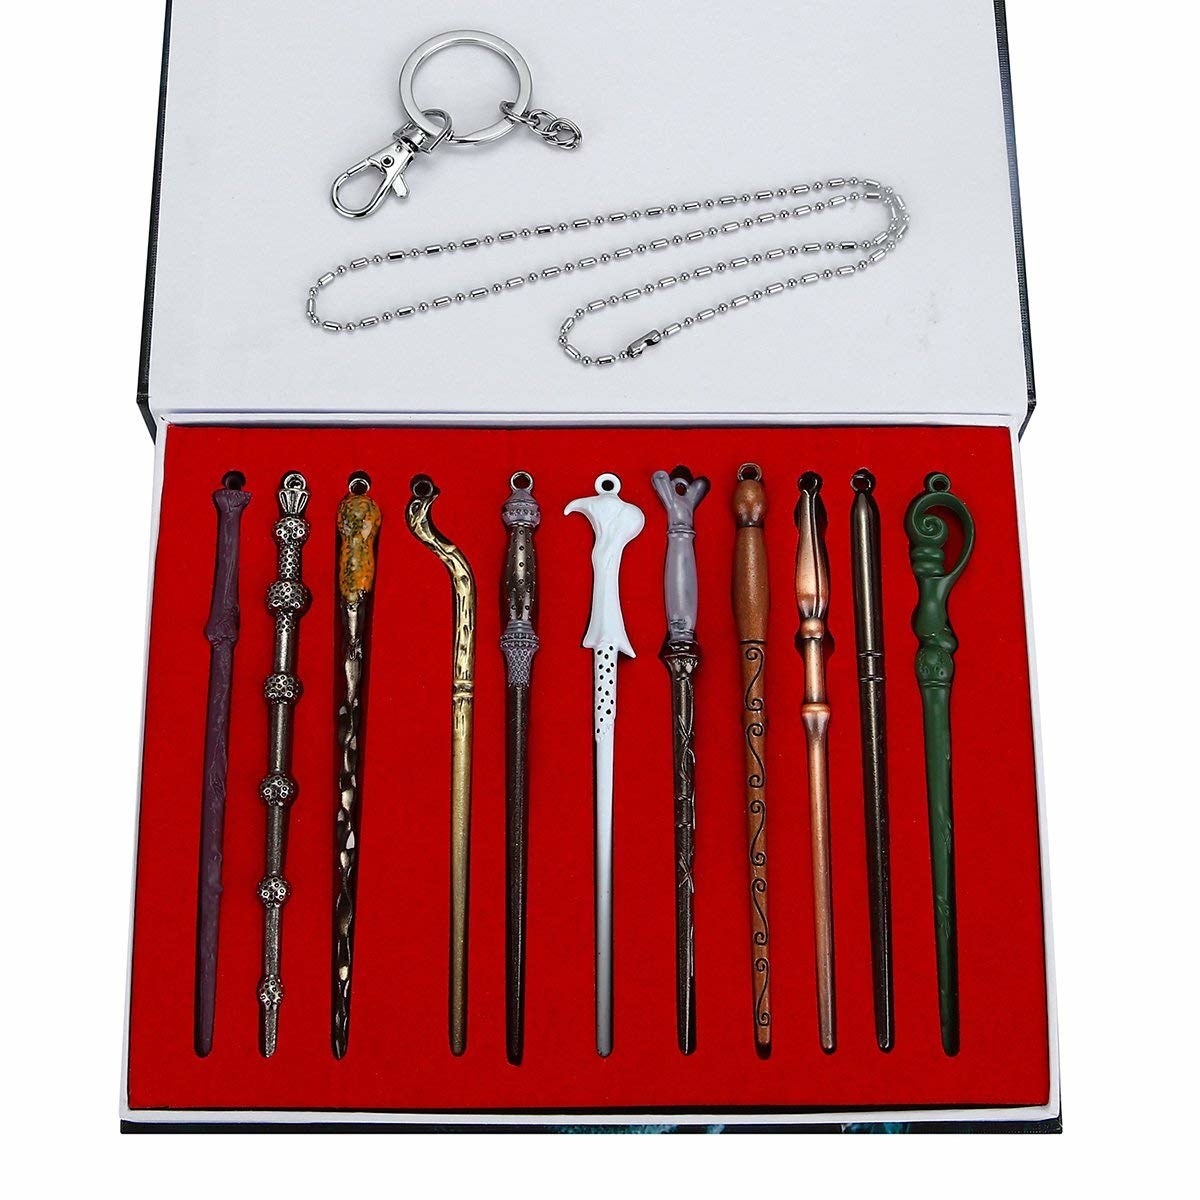 A set of 11 wands from Harry Potter and a keychain and necklace.